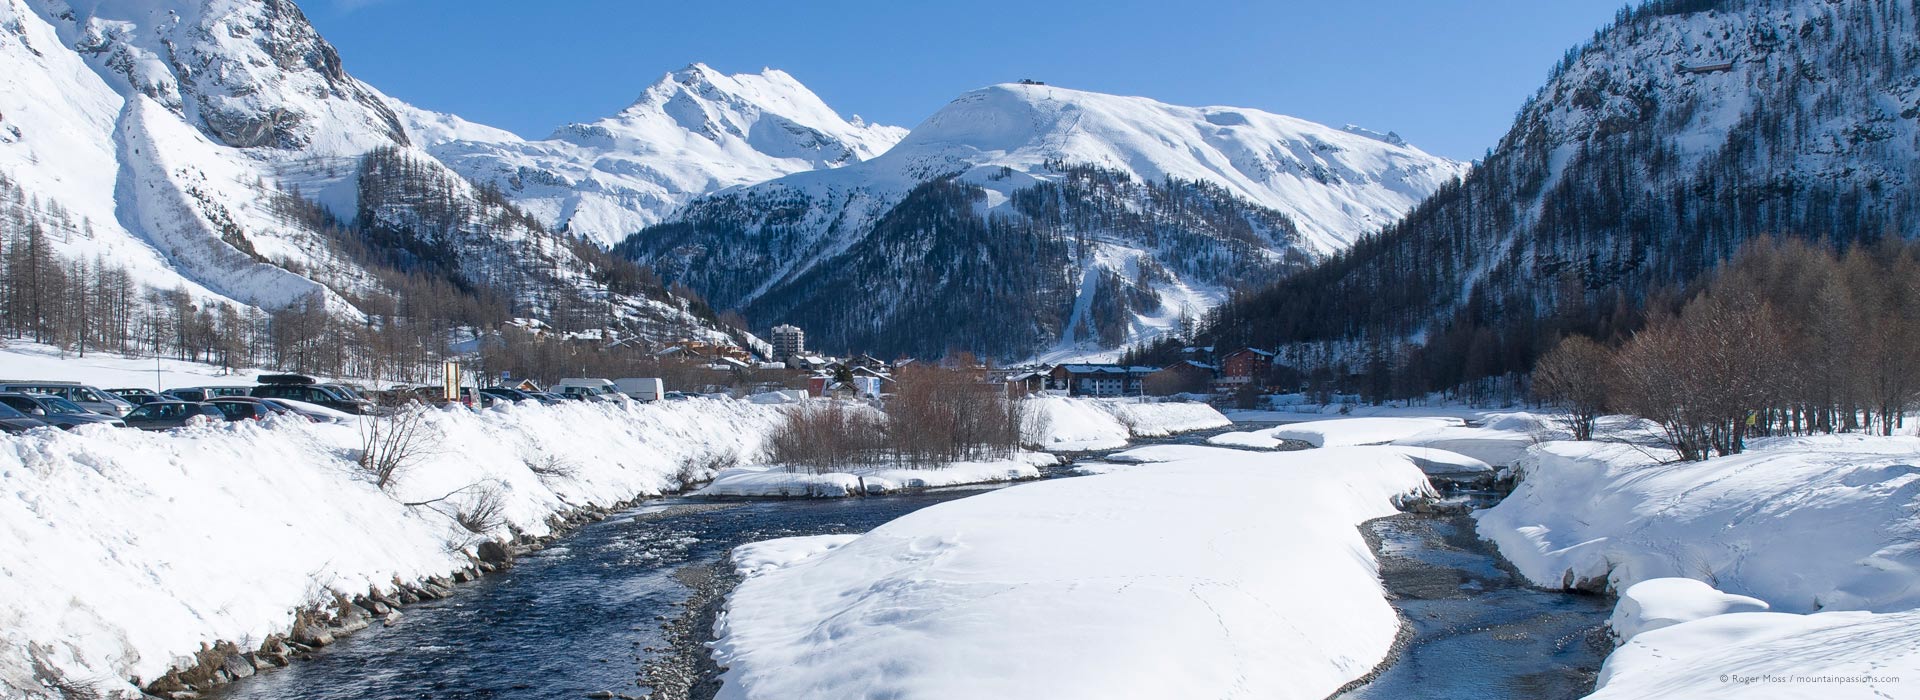 Wide view of river and snow-covered valley setting of Val d'Isere ski village.